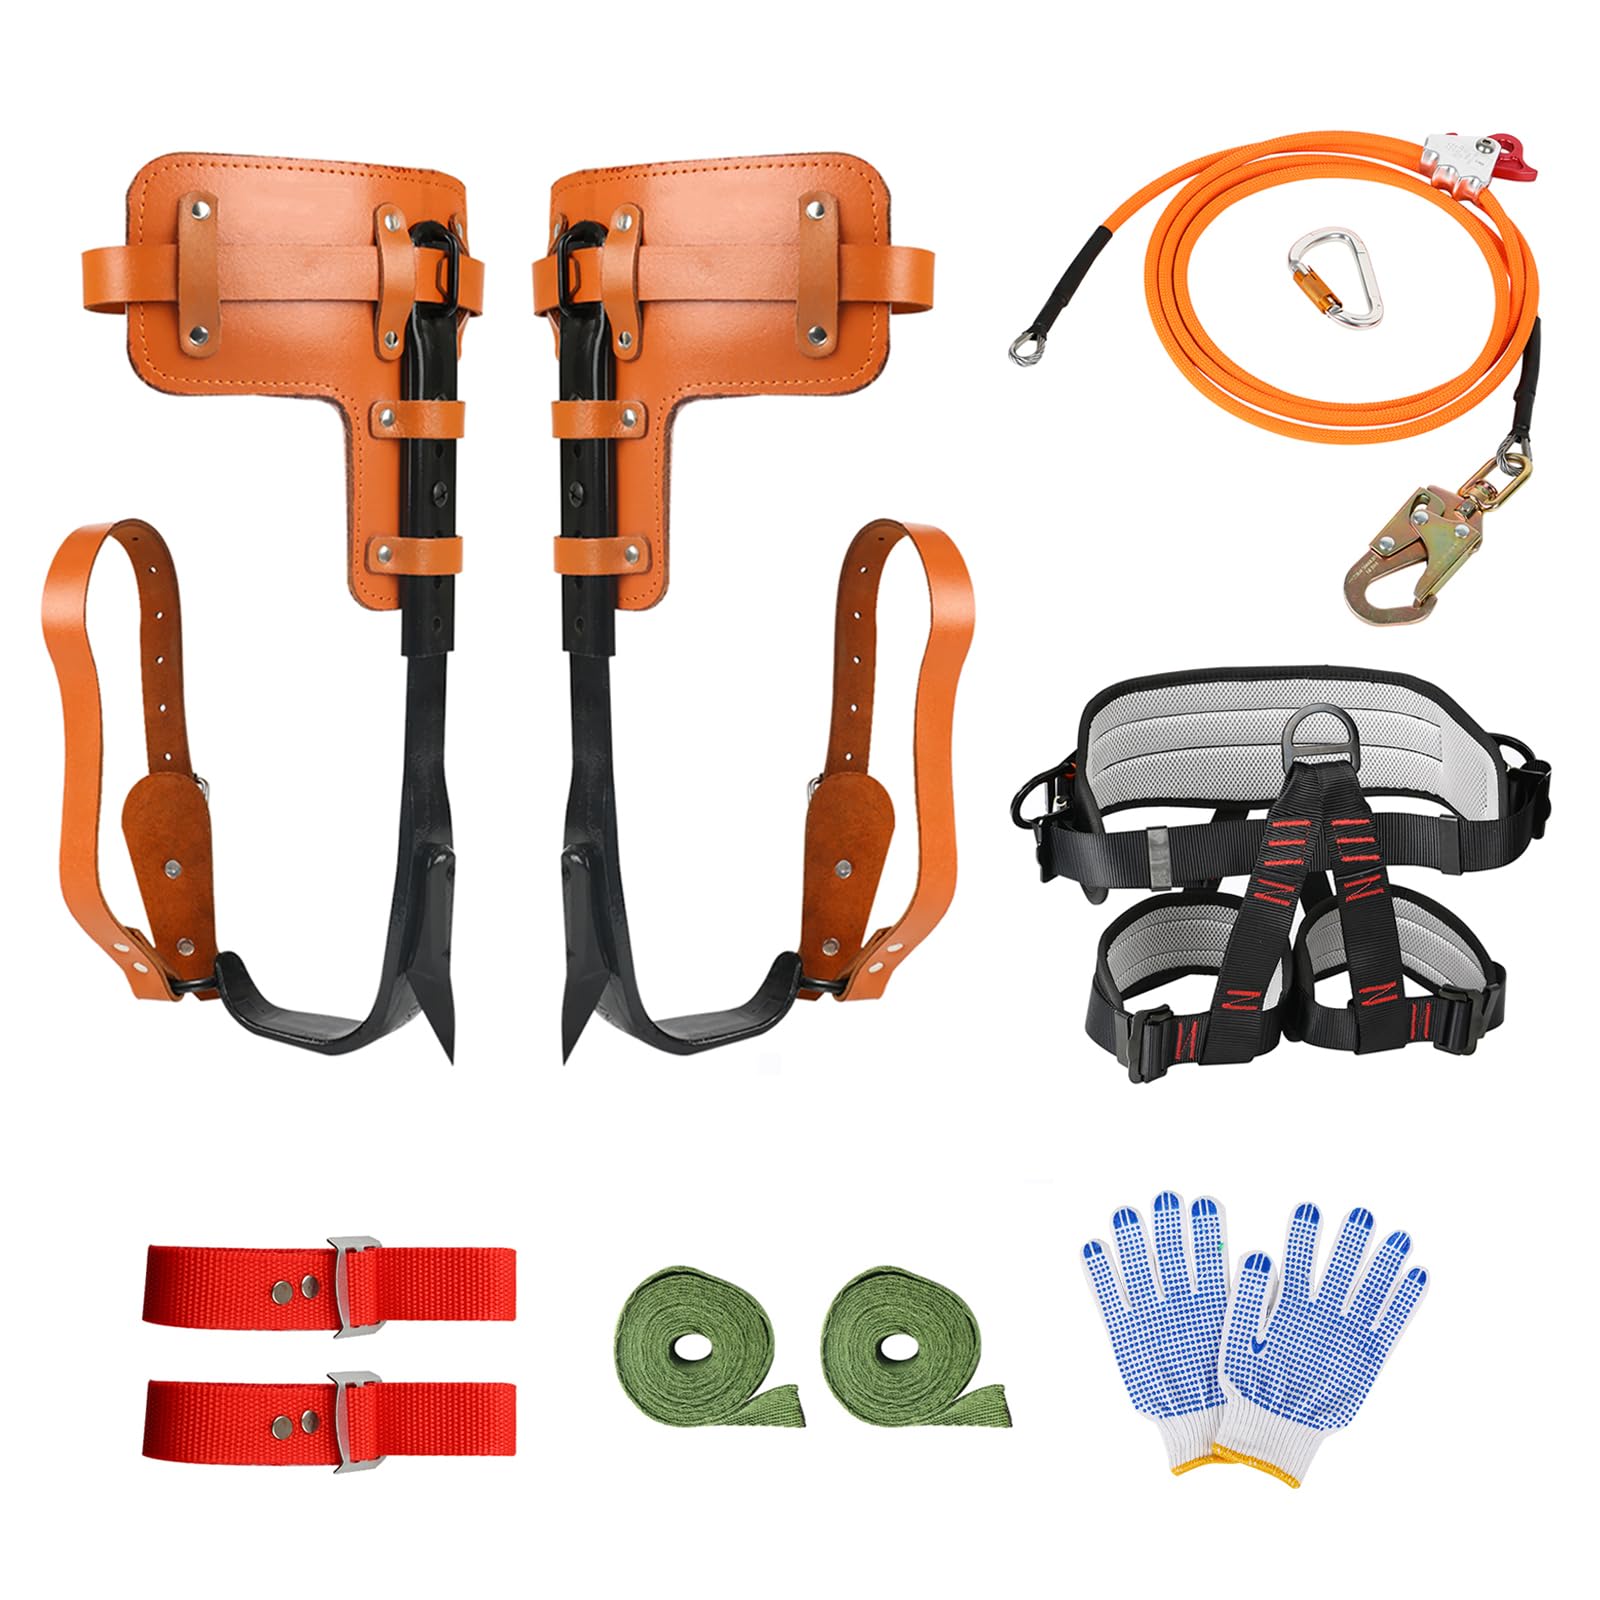 ZIAERKOR Tree Climbing Gear and Equipment, Tree Climbing Spikes Non-Slip, Tree Climbing kit for Tree Work, Arborist Climbing Spurs with Adjustable Climbing Belt for Observation and Picking Fruit